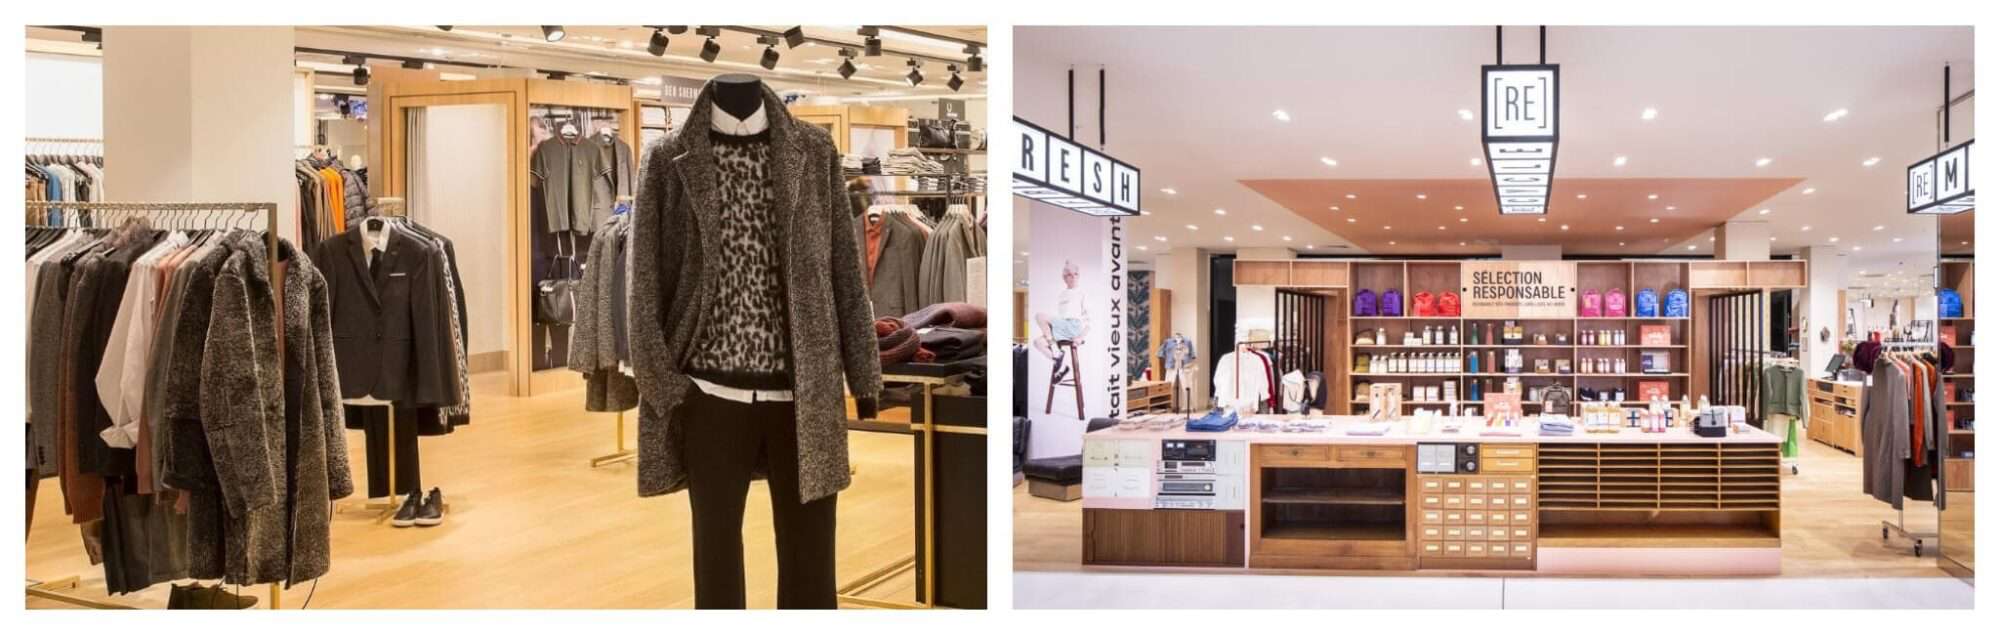 Left: a clothes display from the men's department at Galeries Lafayette; right: a display in the vintage section of Galeries Lafayette Haussmann